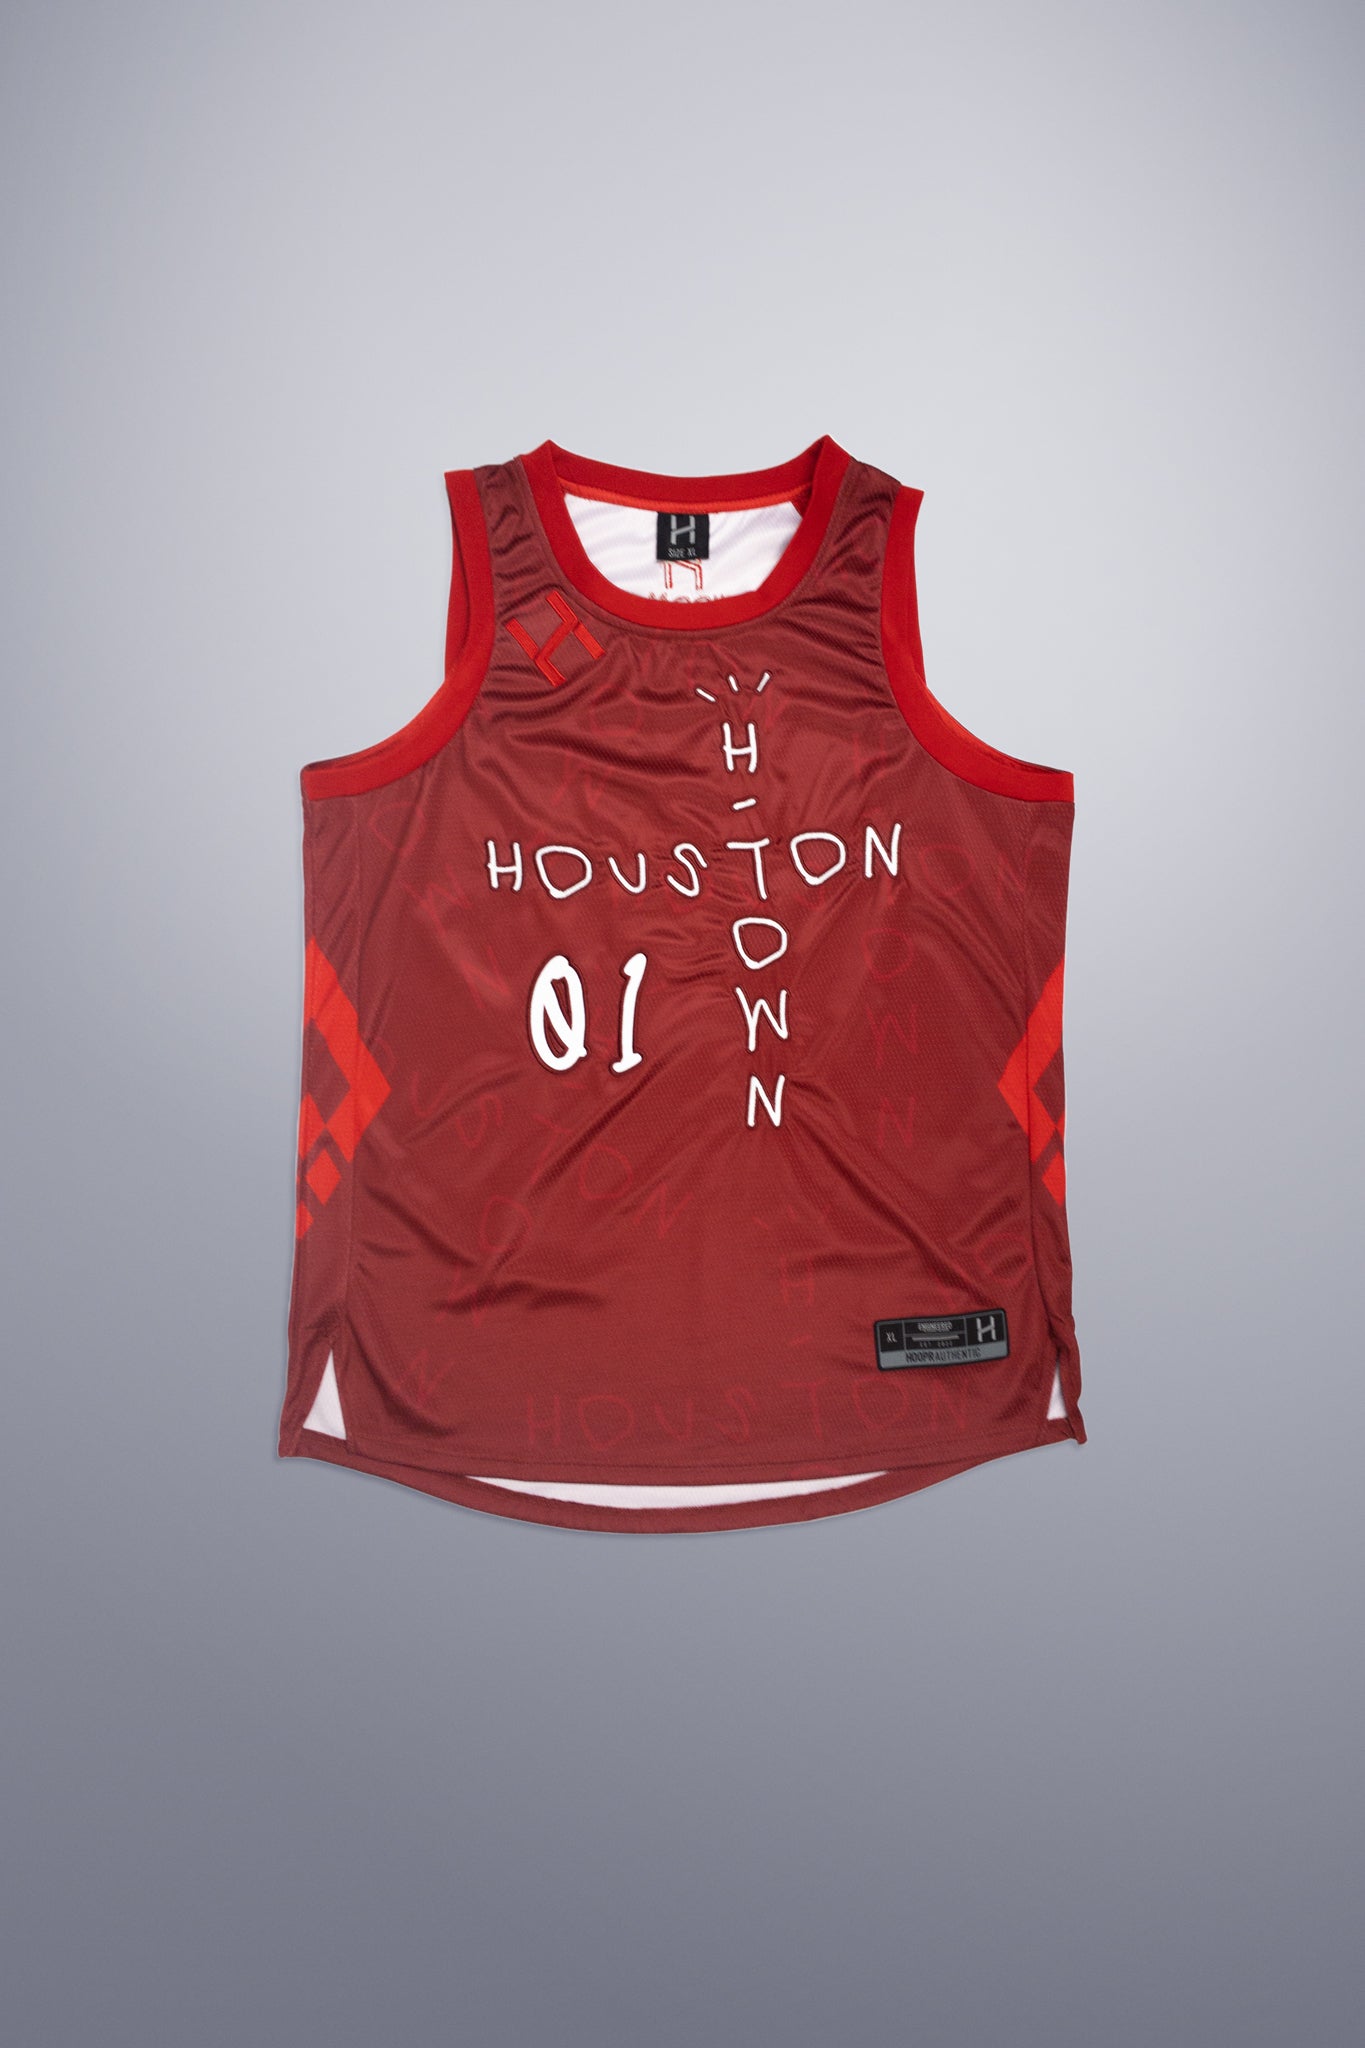 H-Town Jack Jersey